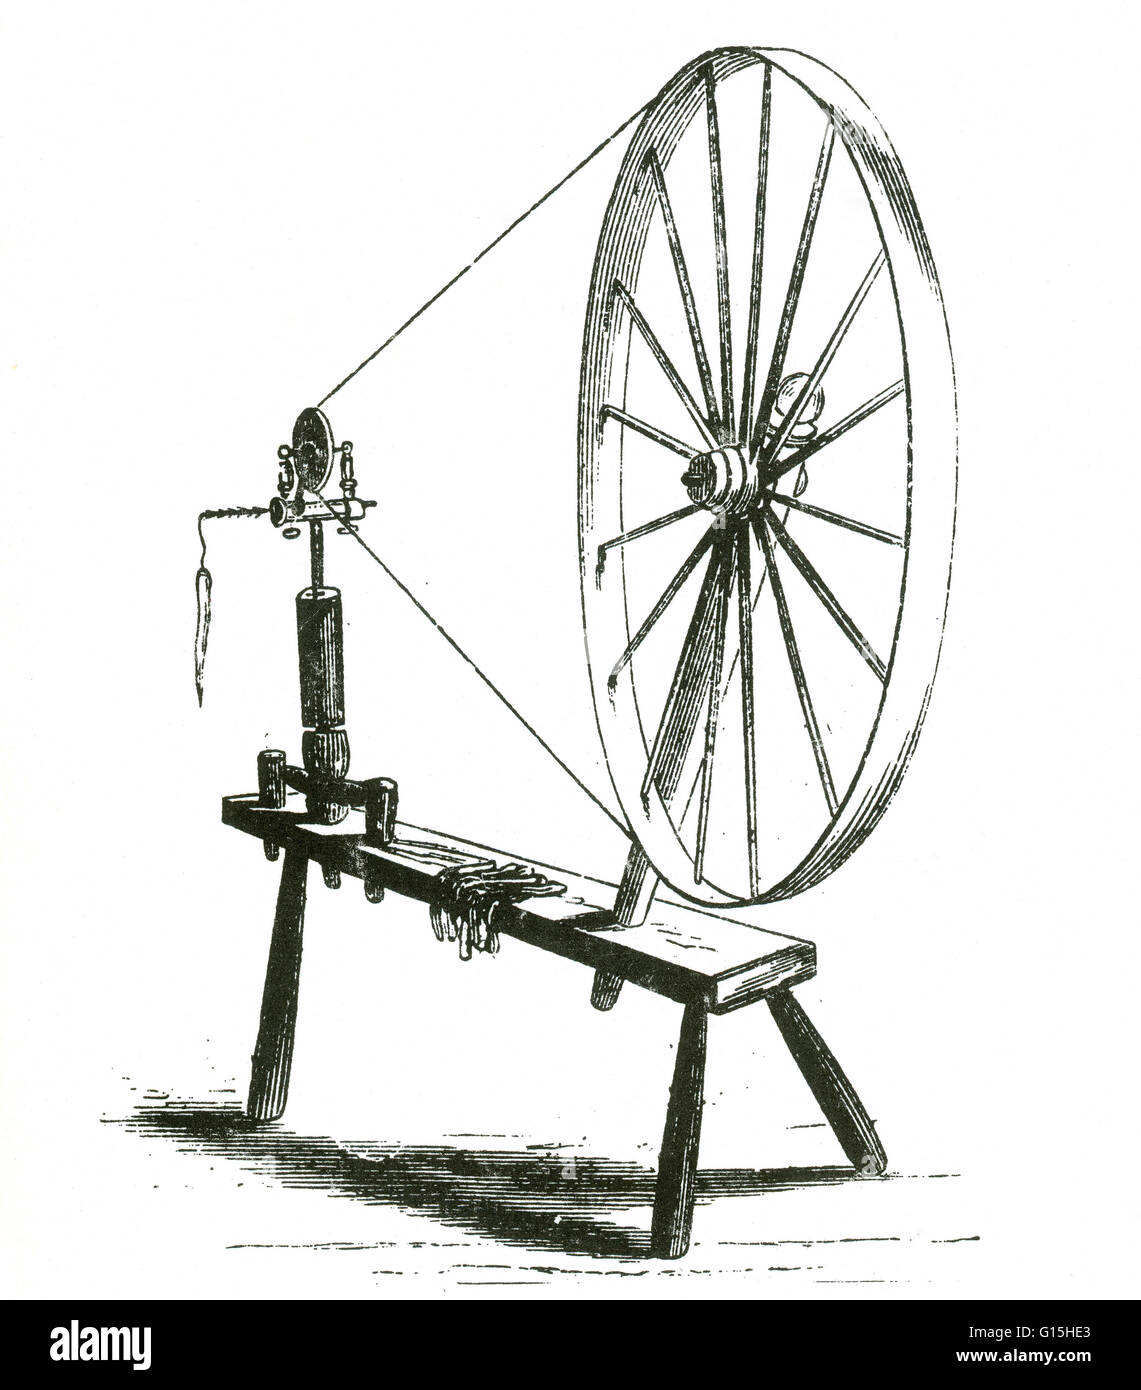 A spinning wheel is a device for spinning thread or yarn from natural or  synthetic fibers. Spinning wheels appeared in Asia, probably in the 11th  century, and very gradually replaced hand spinning